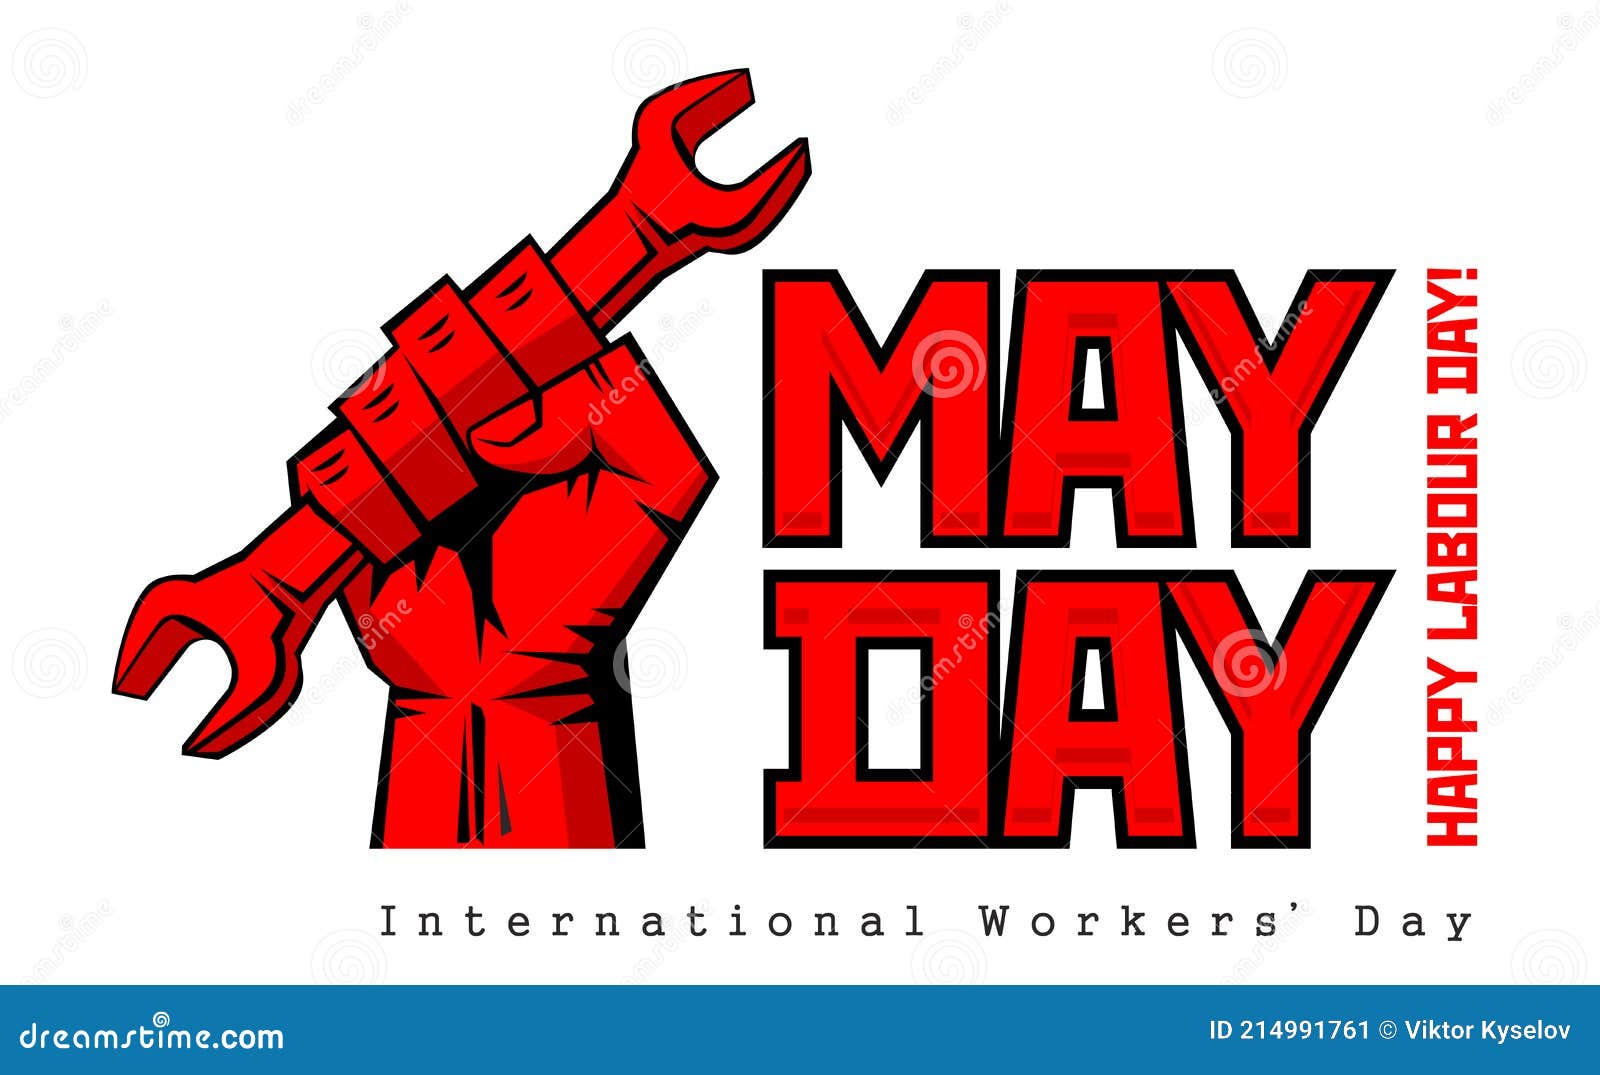 May Day Labour Day poster stock vector. Illustration of mayday - 214991761